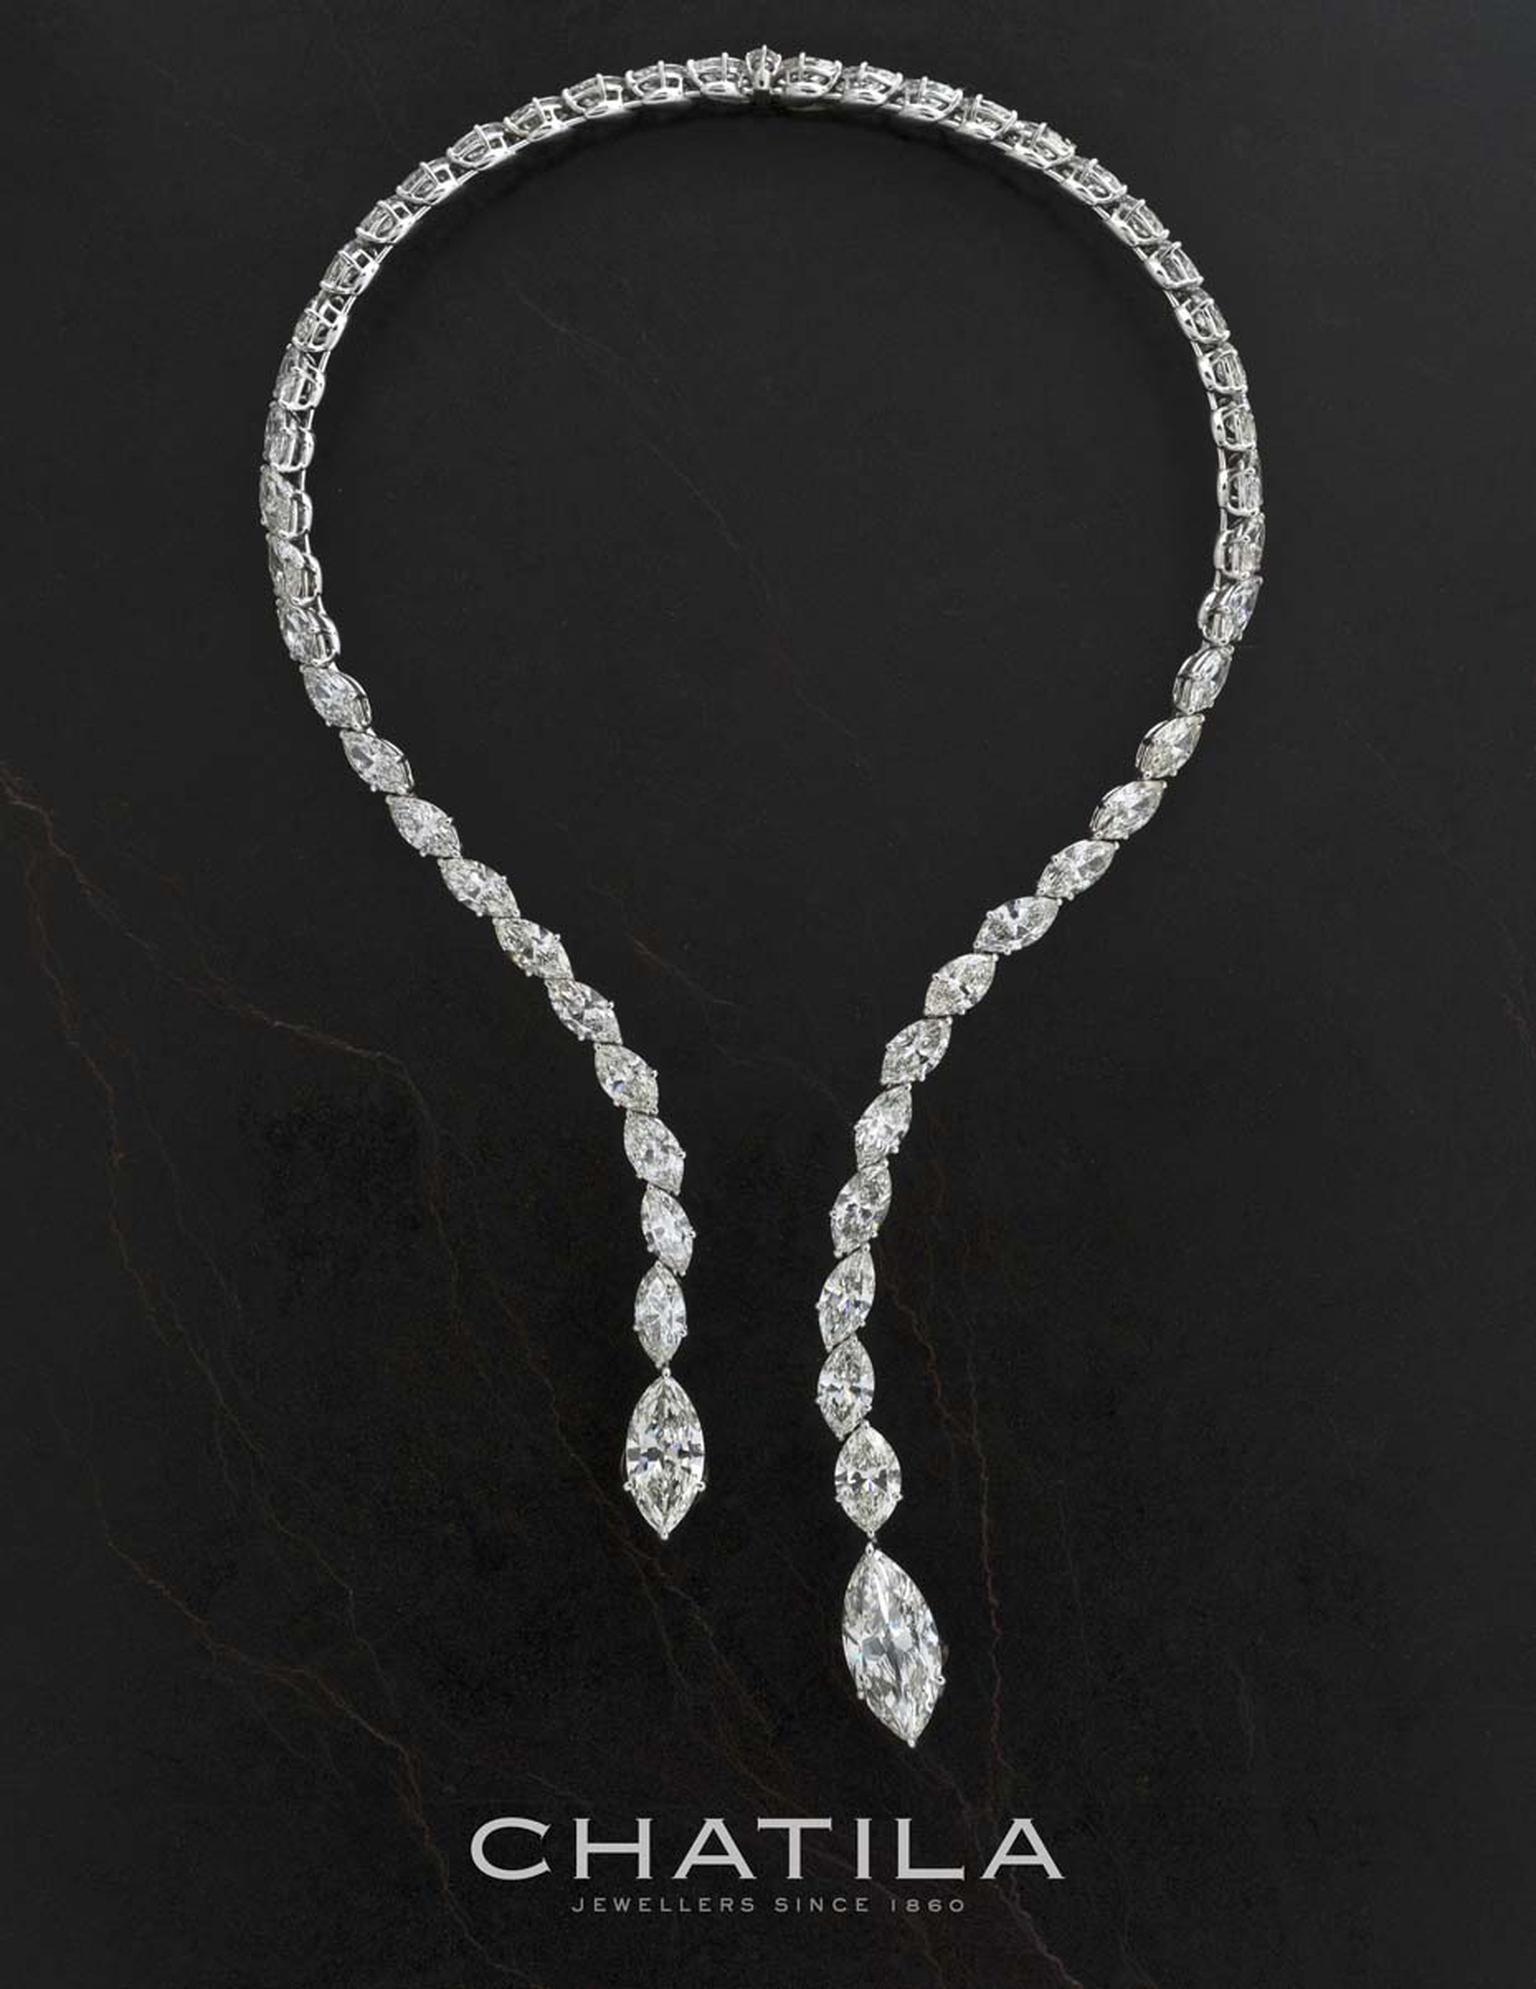 Also on display at DJWE will be this diamond necklace from Chatila set with 53 marquise-cut diamonds weighing 74.27ct.